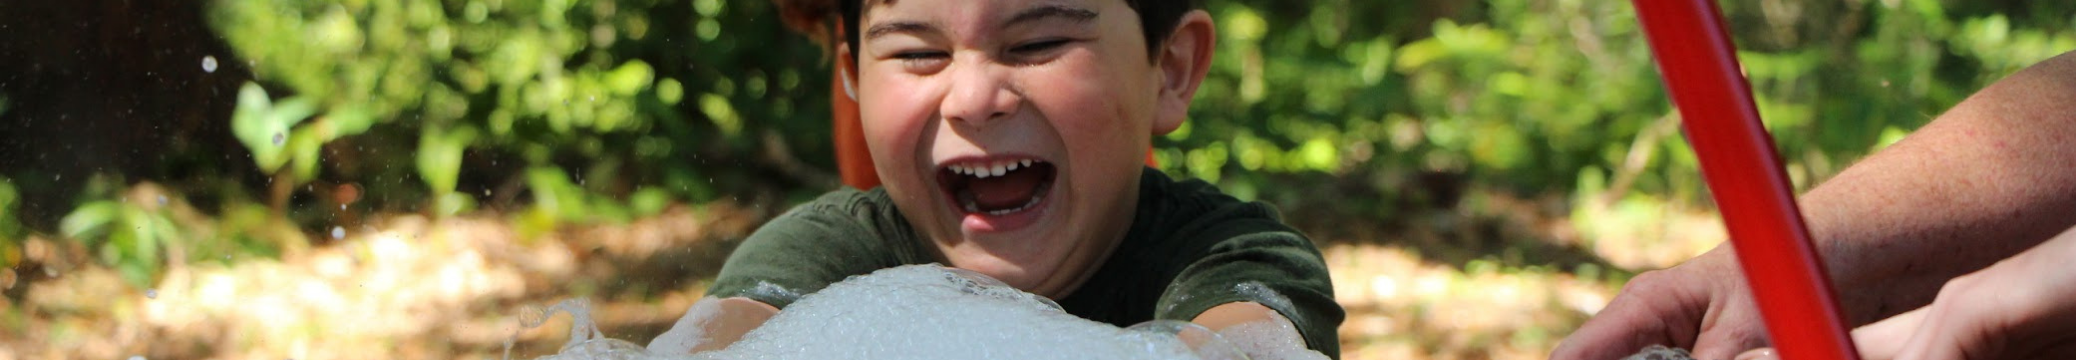 child smiling with hands in bubbles